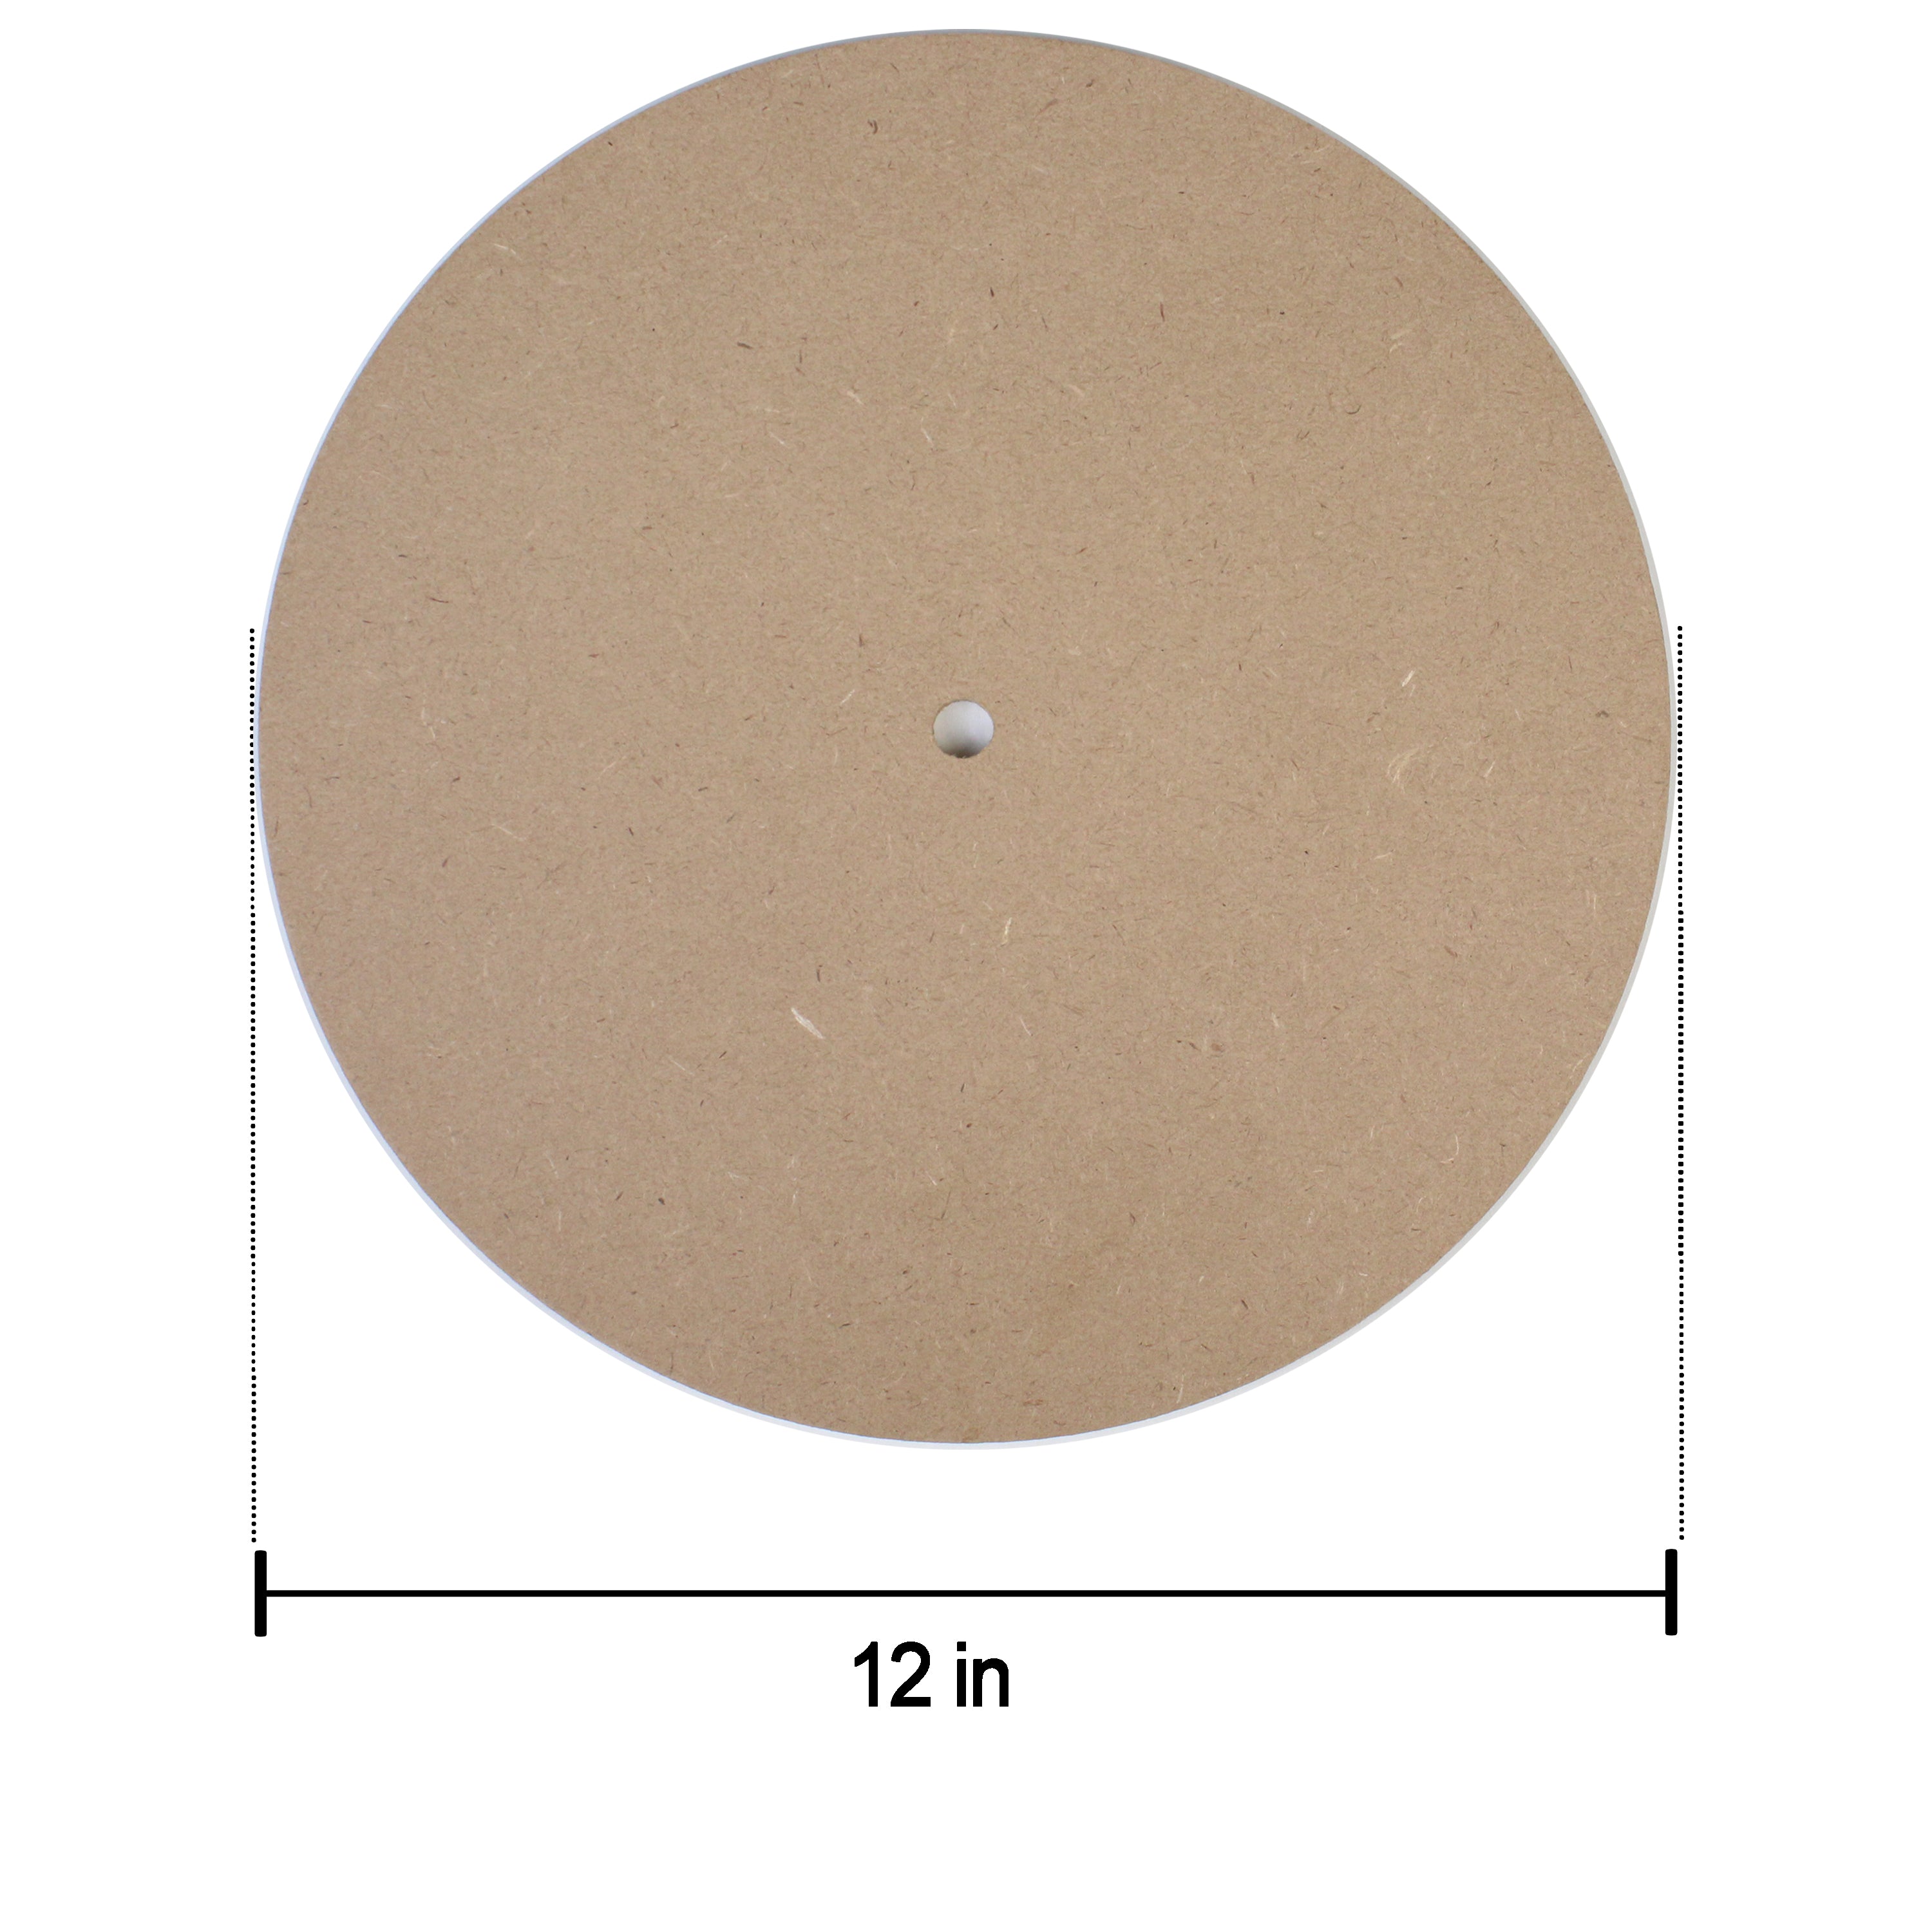 Mdf Clock Face 12Inch Dia 5.5Mm Thick 1Pc Lb